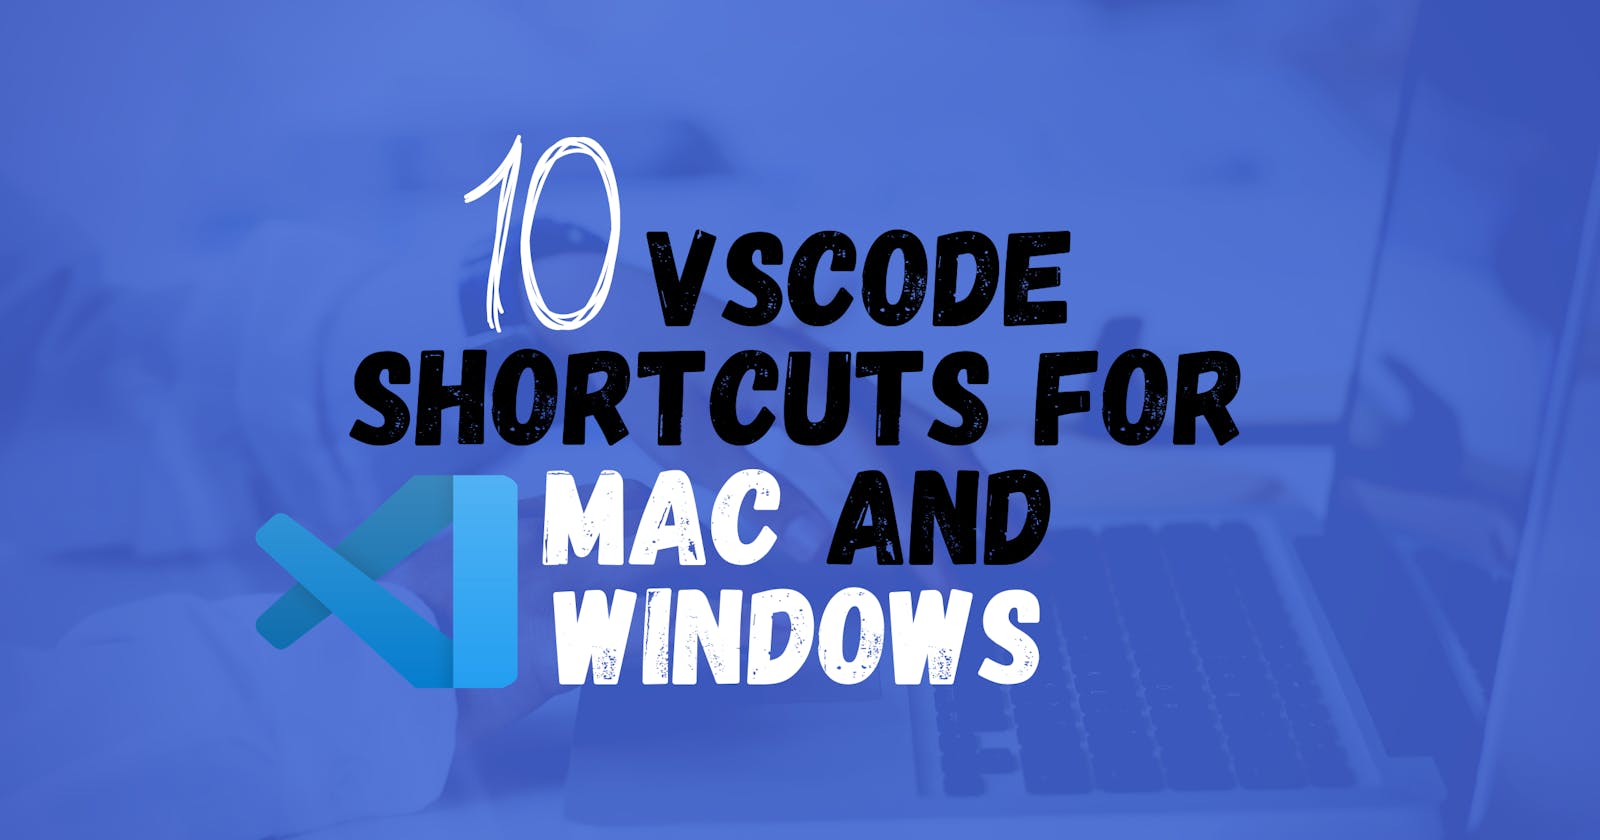 Top 10 VScode Shortcuts For Mac and Windows to Help You be More Productive